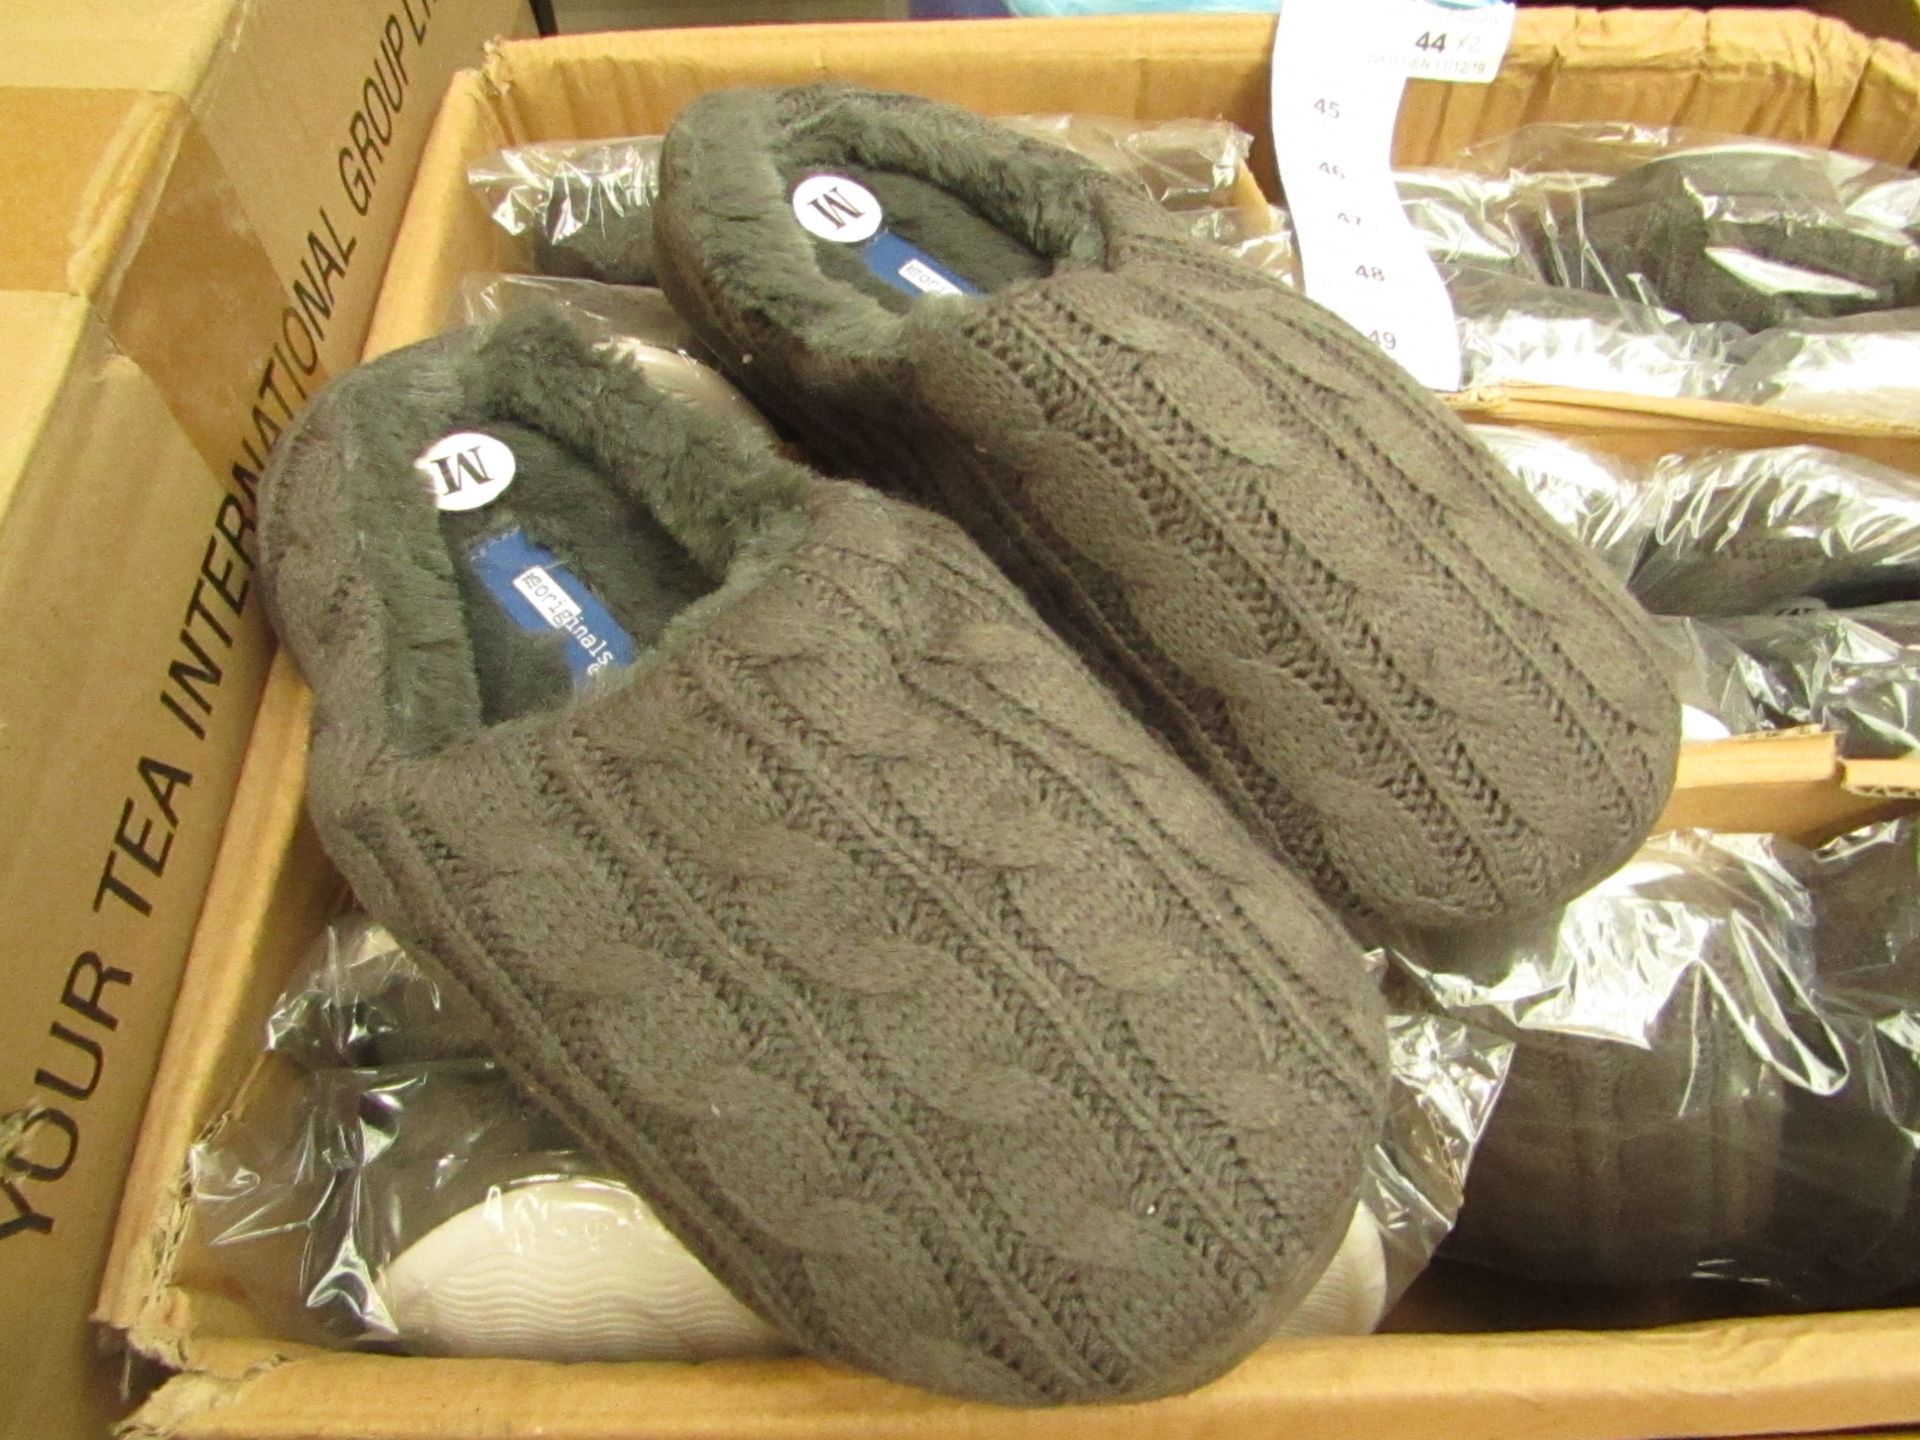 2x Packs of Unisex slippers, Brown Size Medium, all new and packaged.